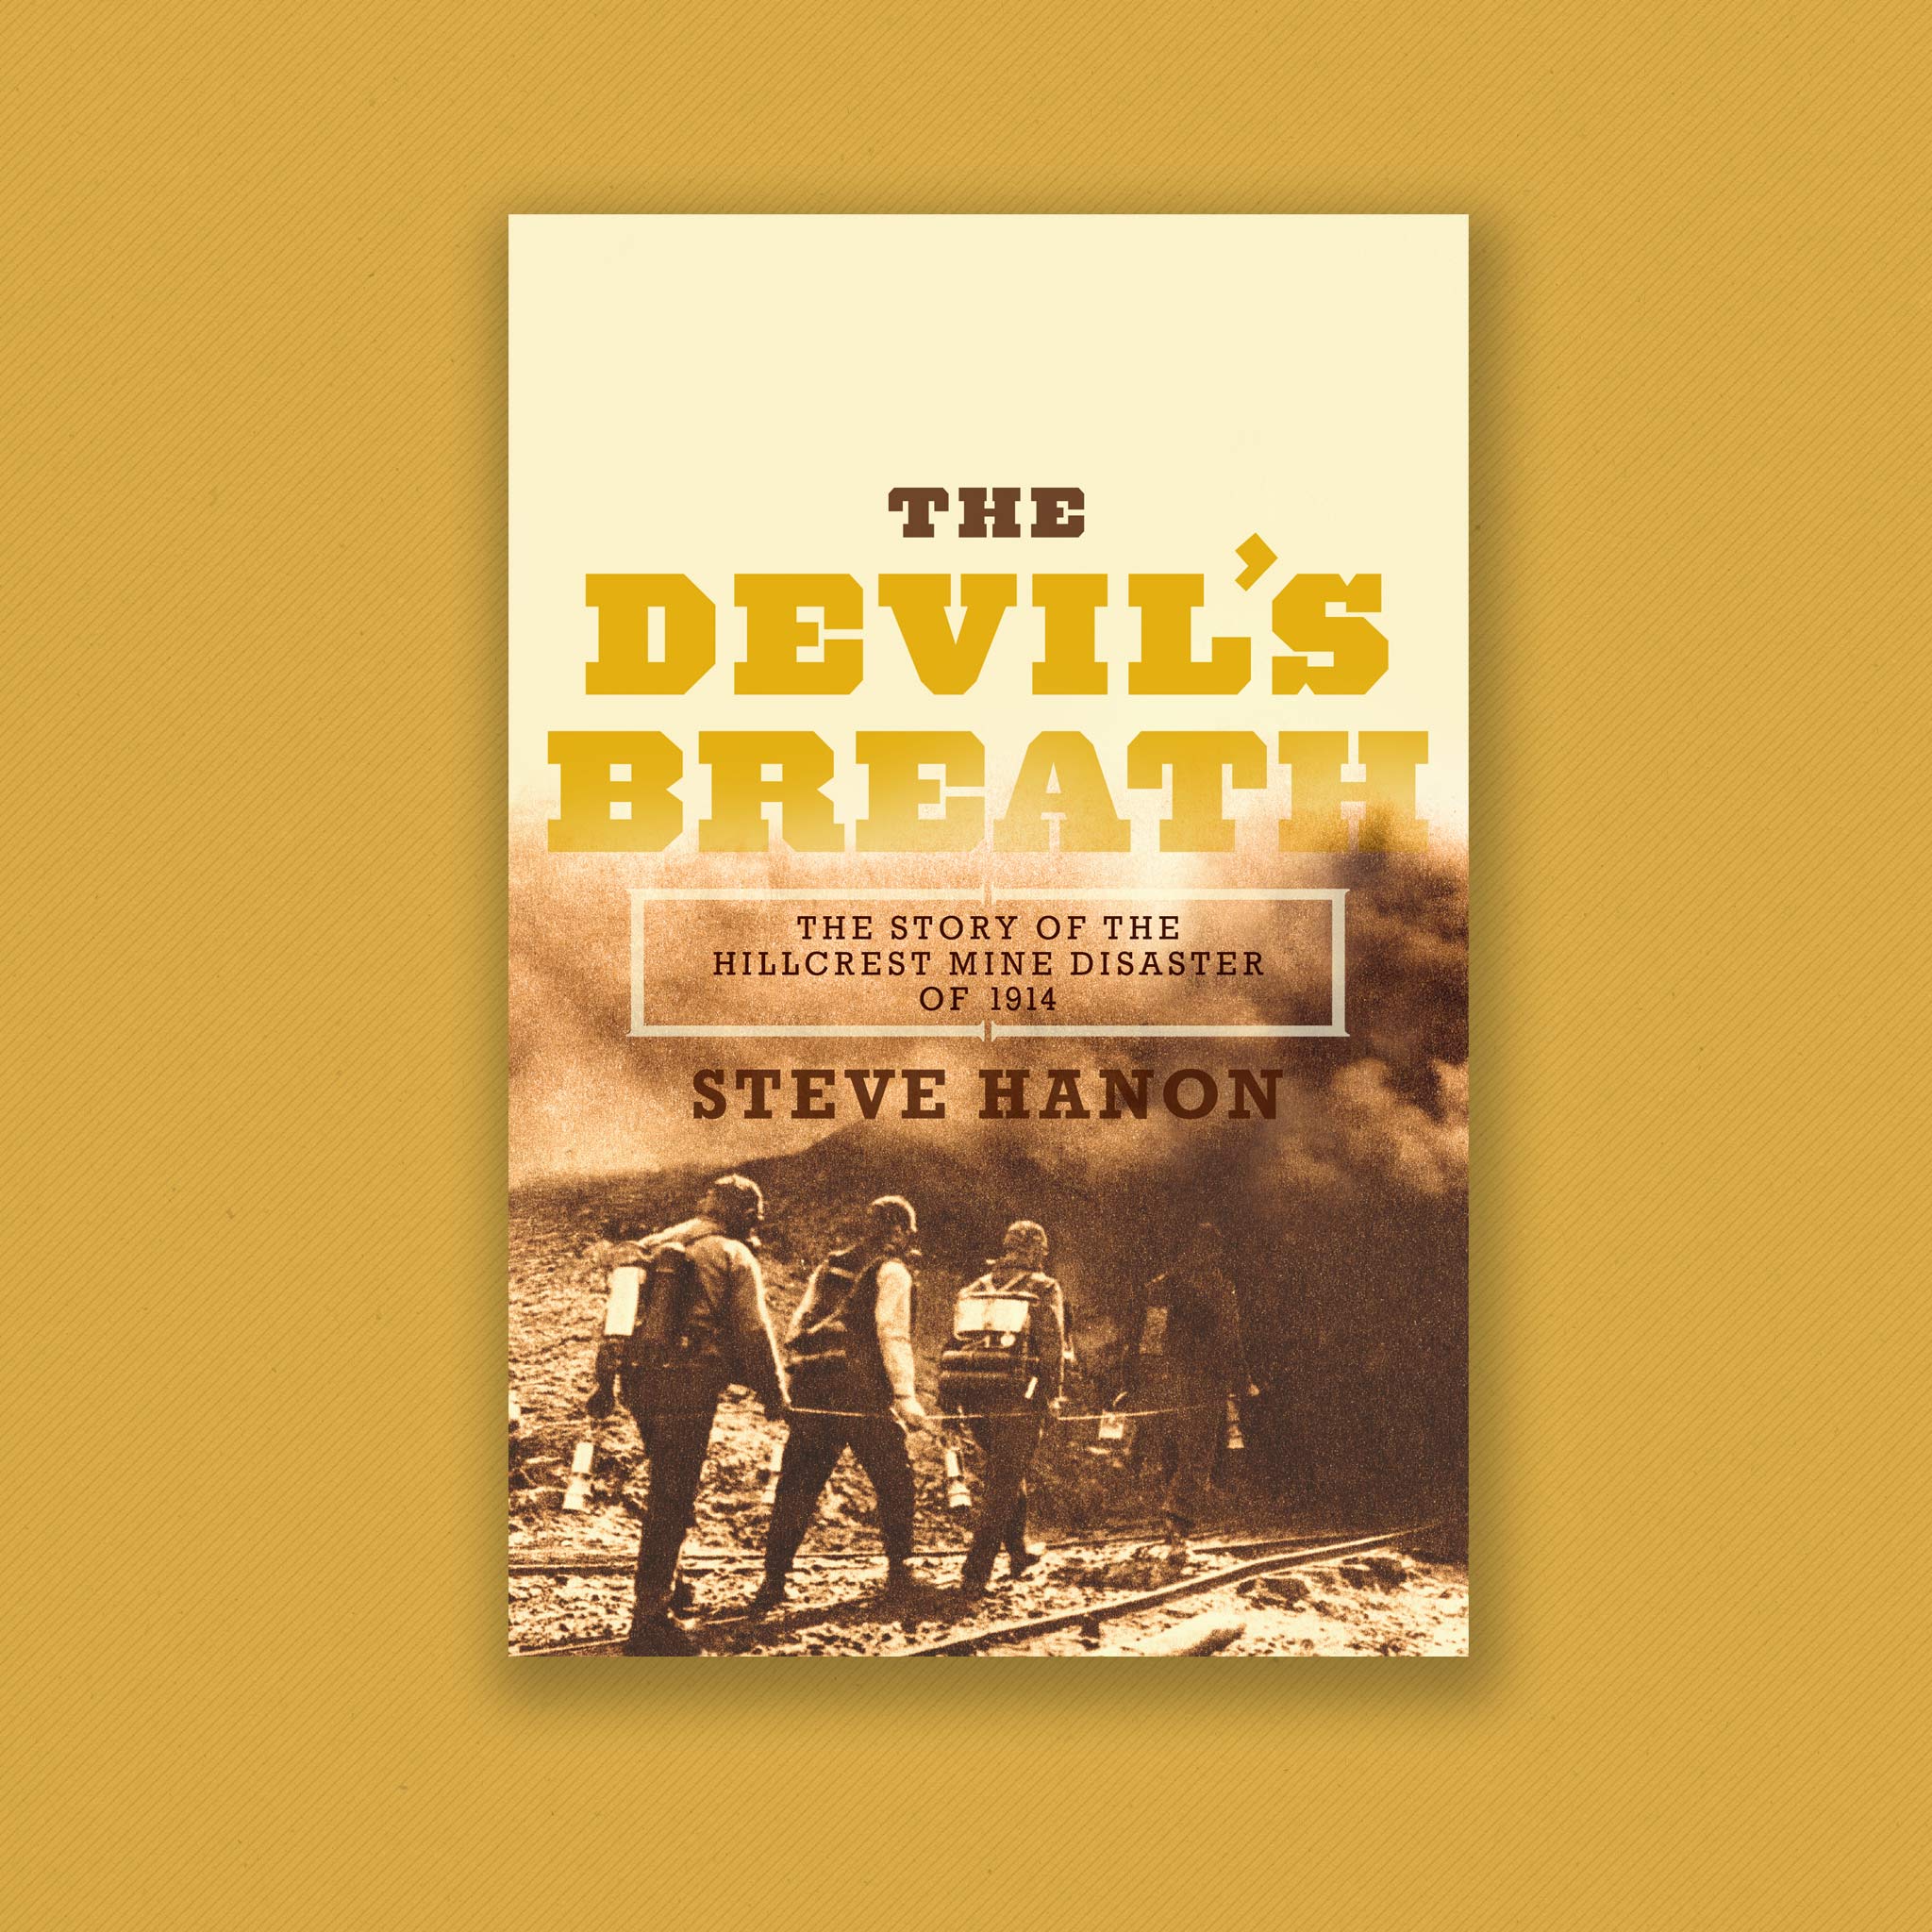 The Devil's Breath: The Story Of The Hillcrest Mine Disaster Of 1914